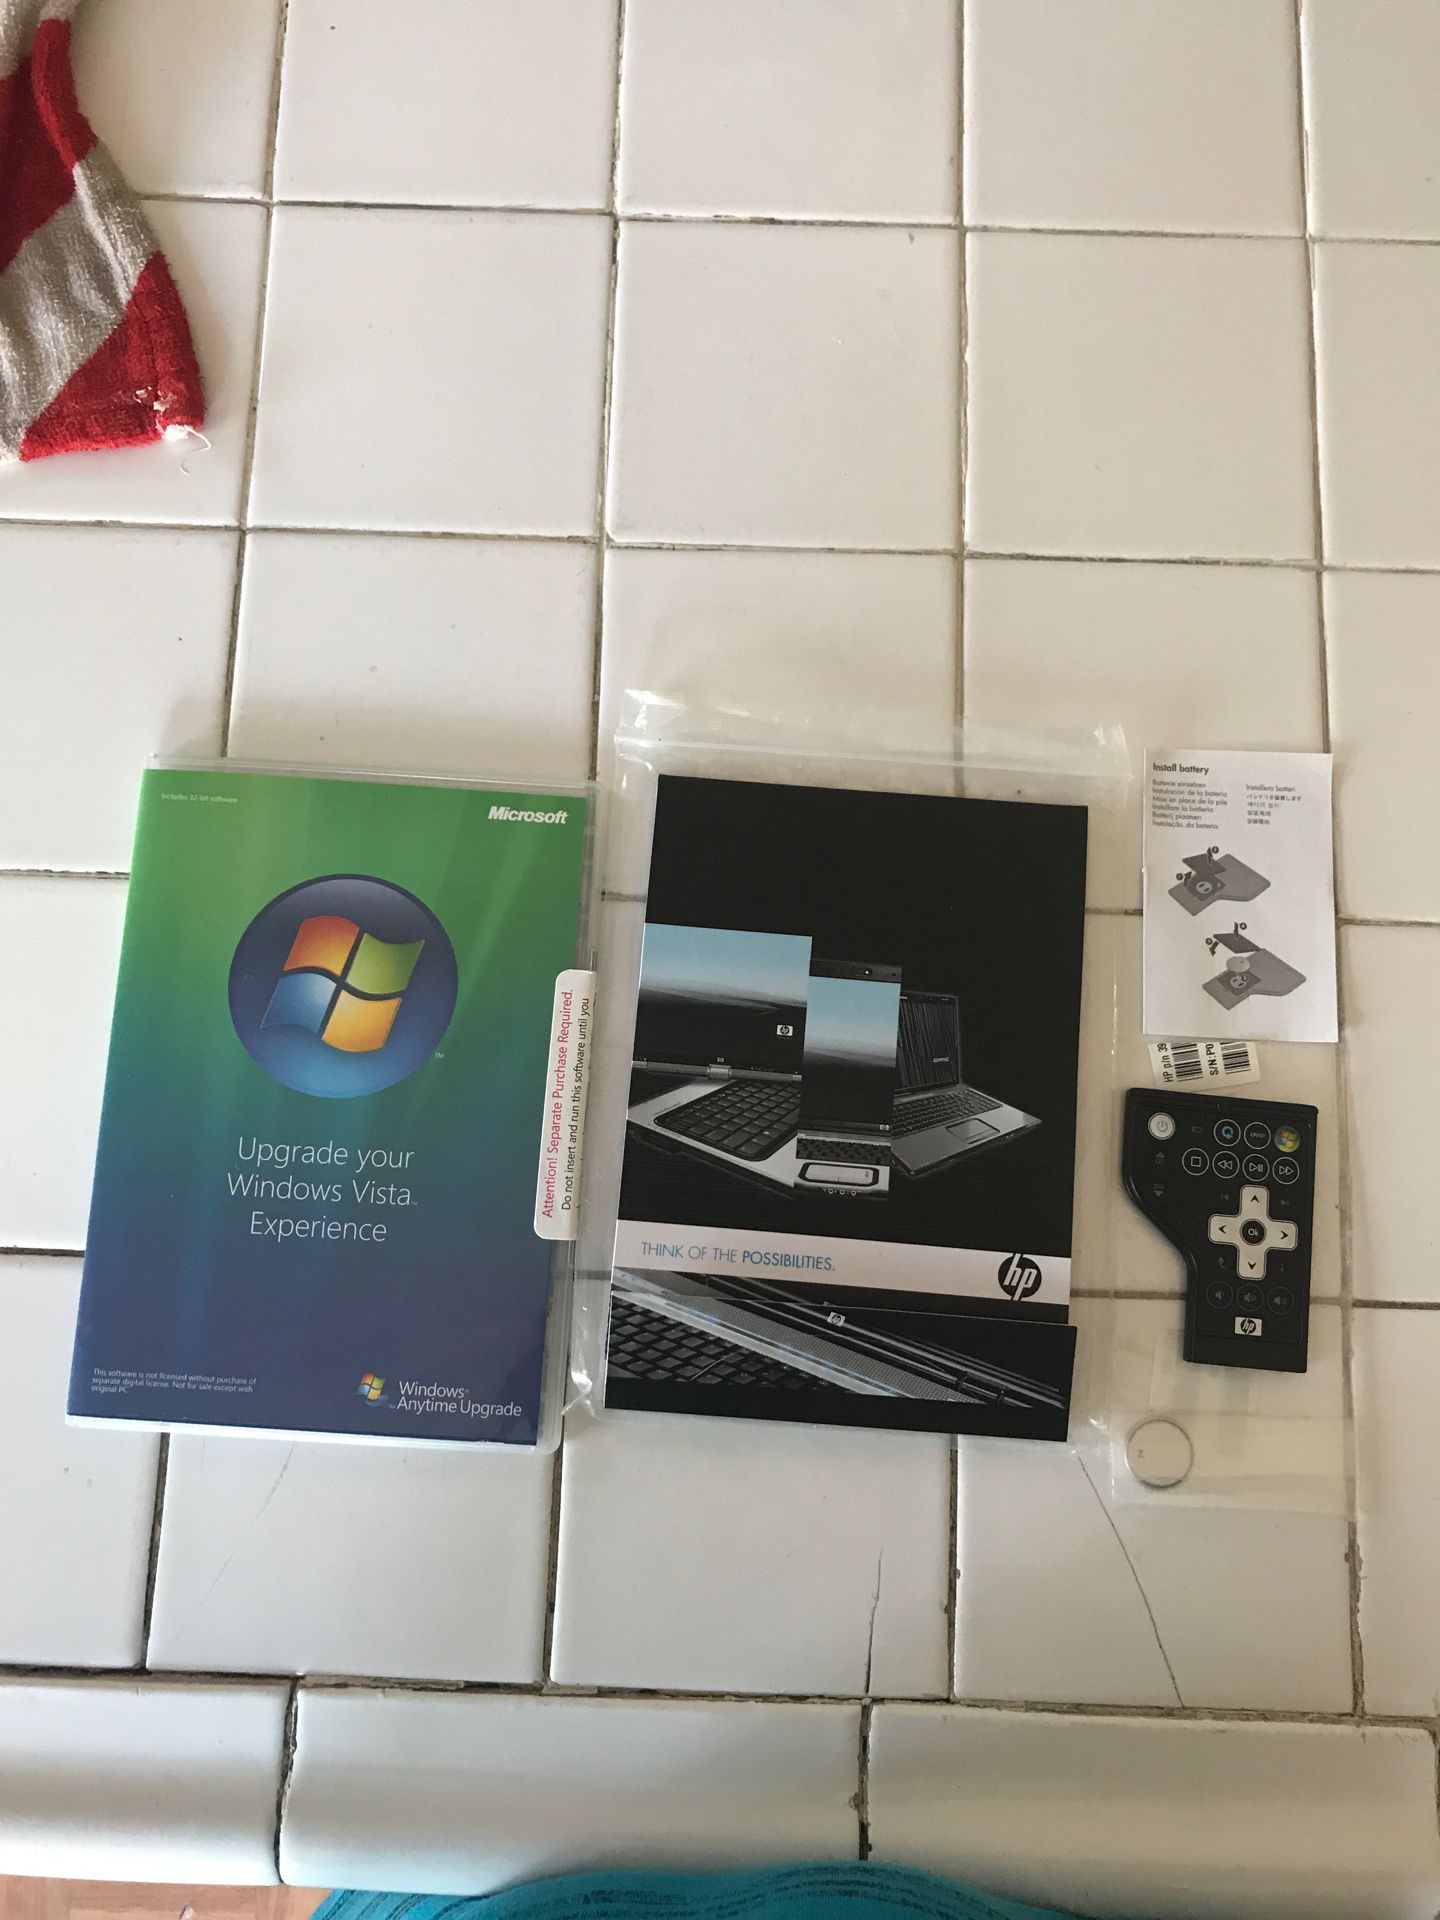 Hp notebook and remote for the computer 💻 and a Microsoft Windows anytime upgrade disc